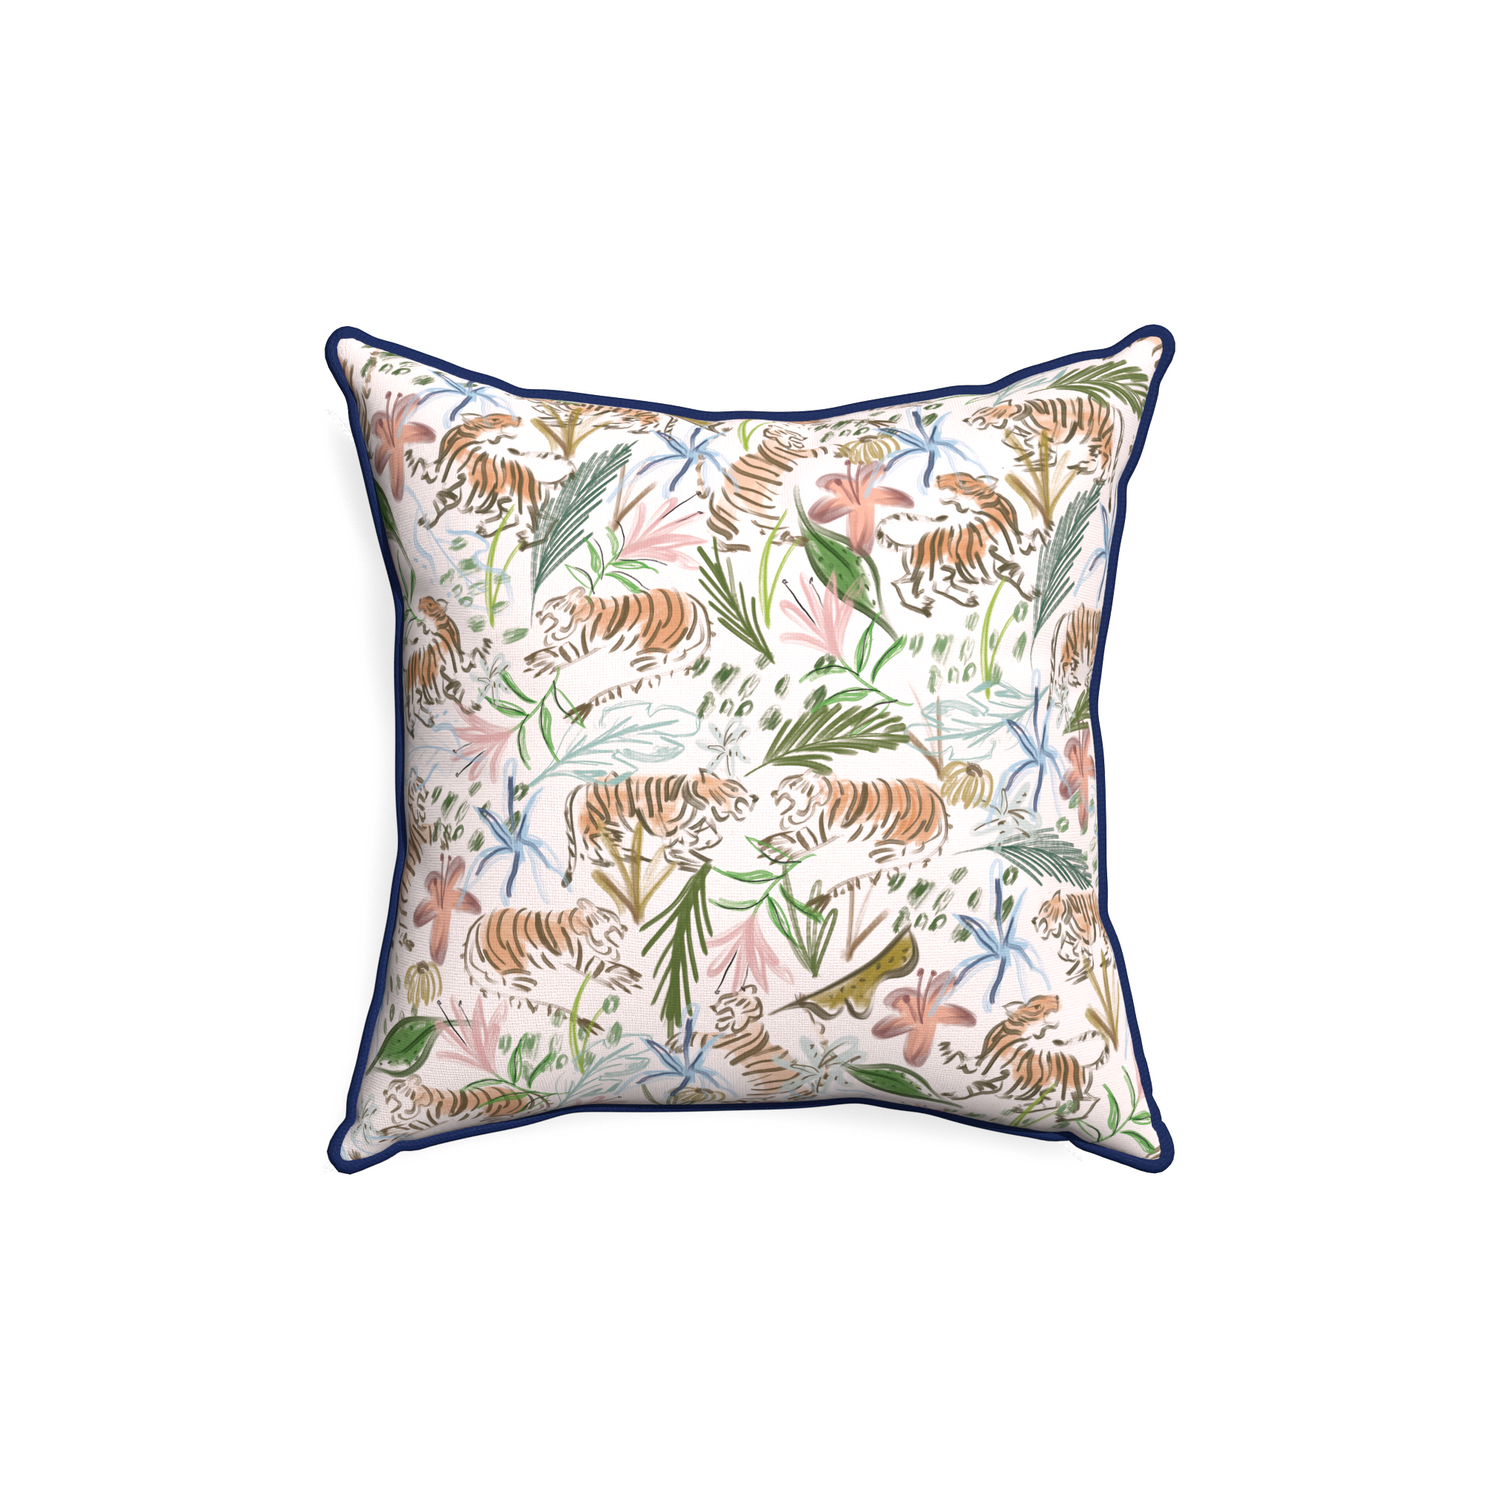 18-square frida pink custom pink chinoiserie tigerpillow with midnight piping on white background